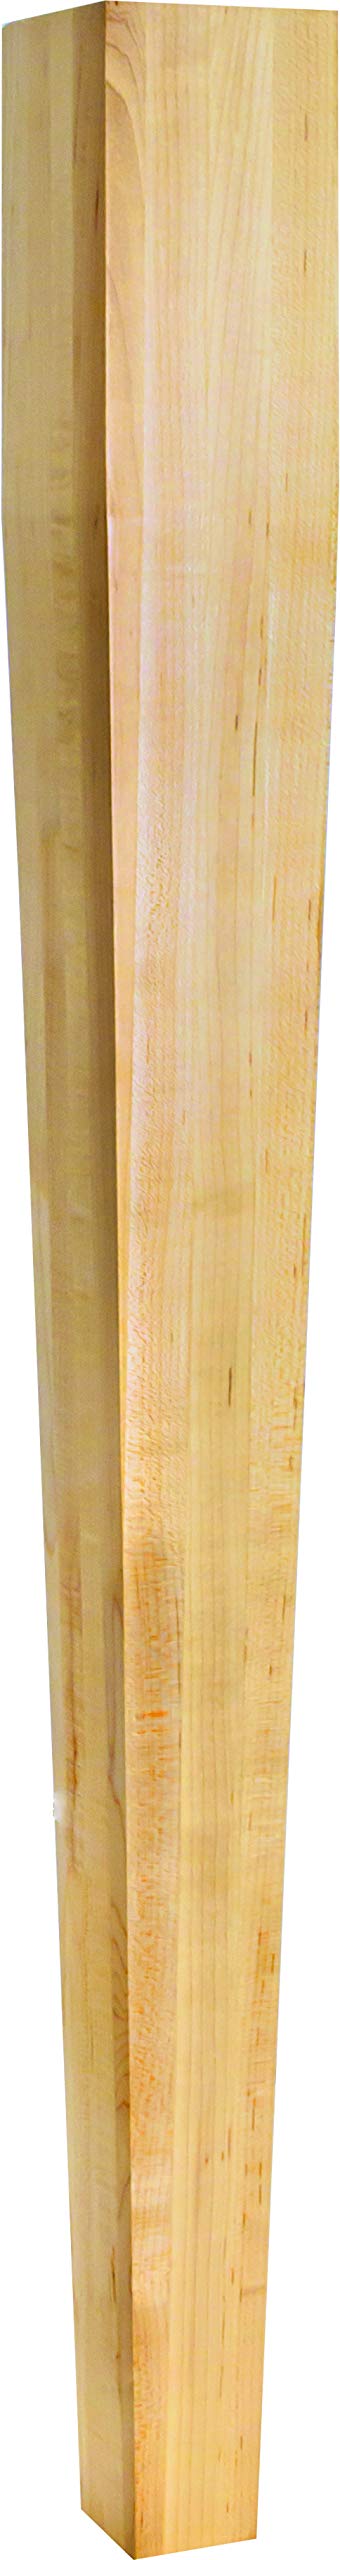 Hardware Resources P42WB 3-1/2" W x 3-1/2" D x 35-1/2" H White Birch Square Post